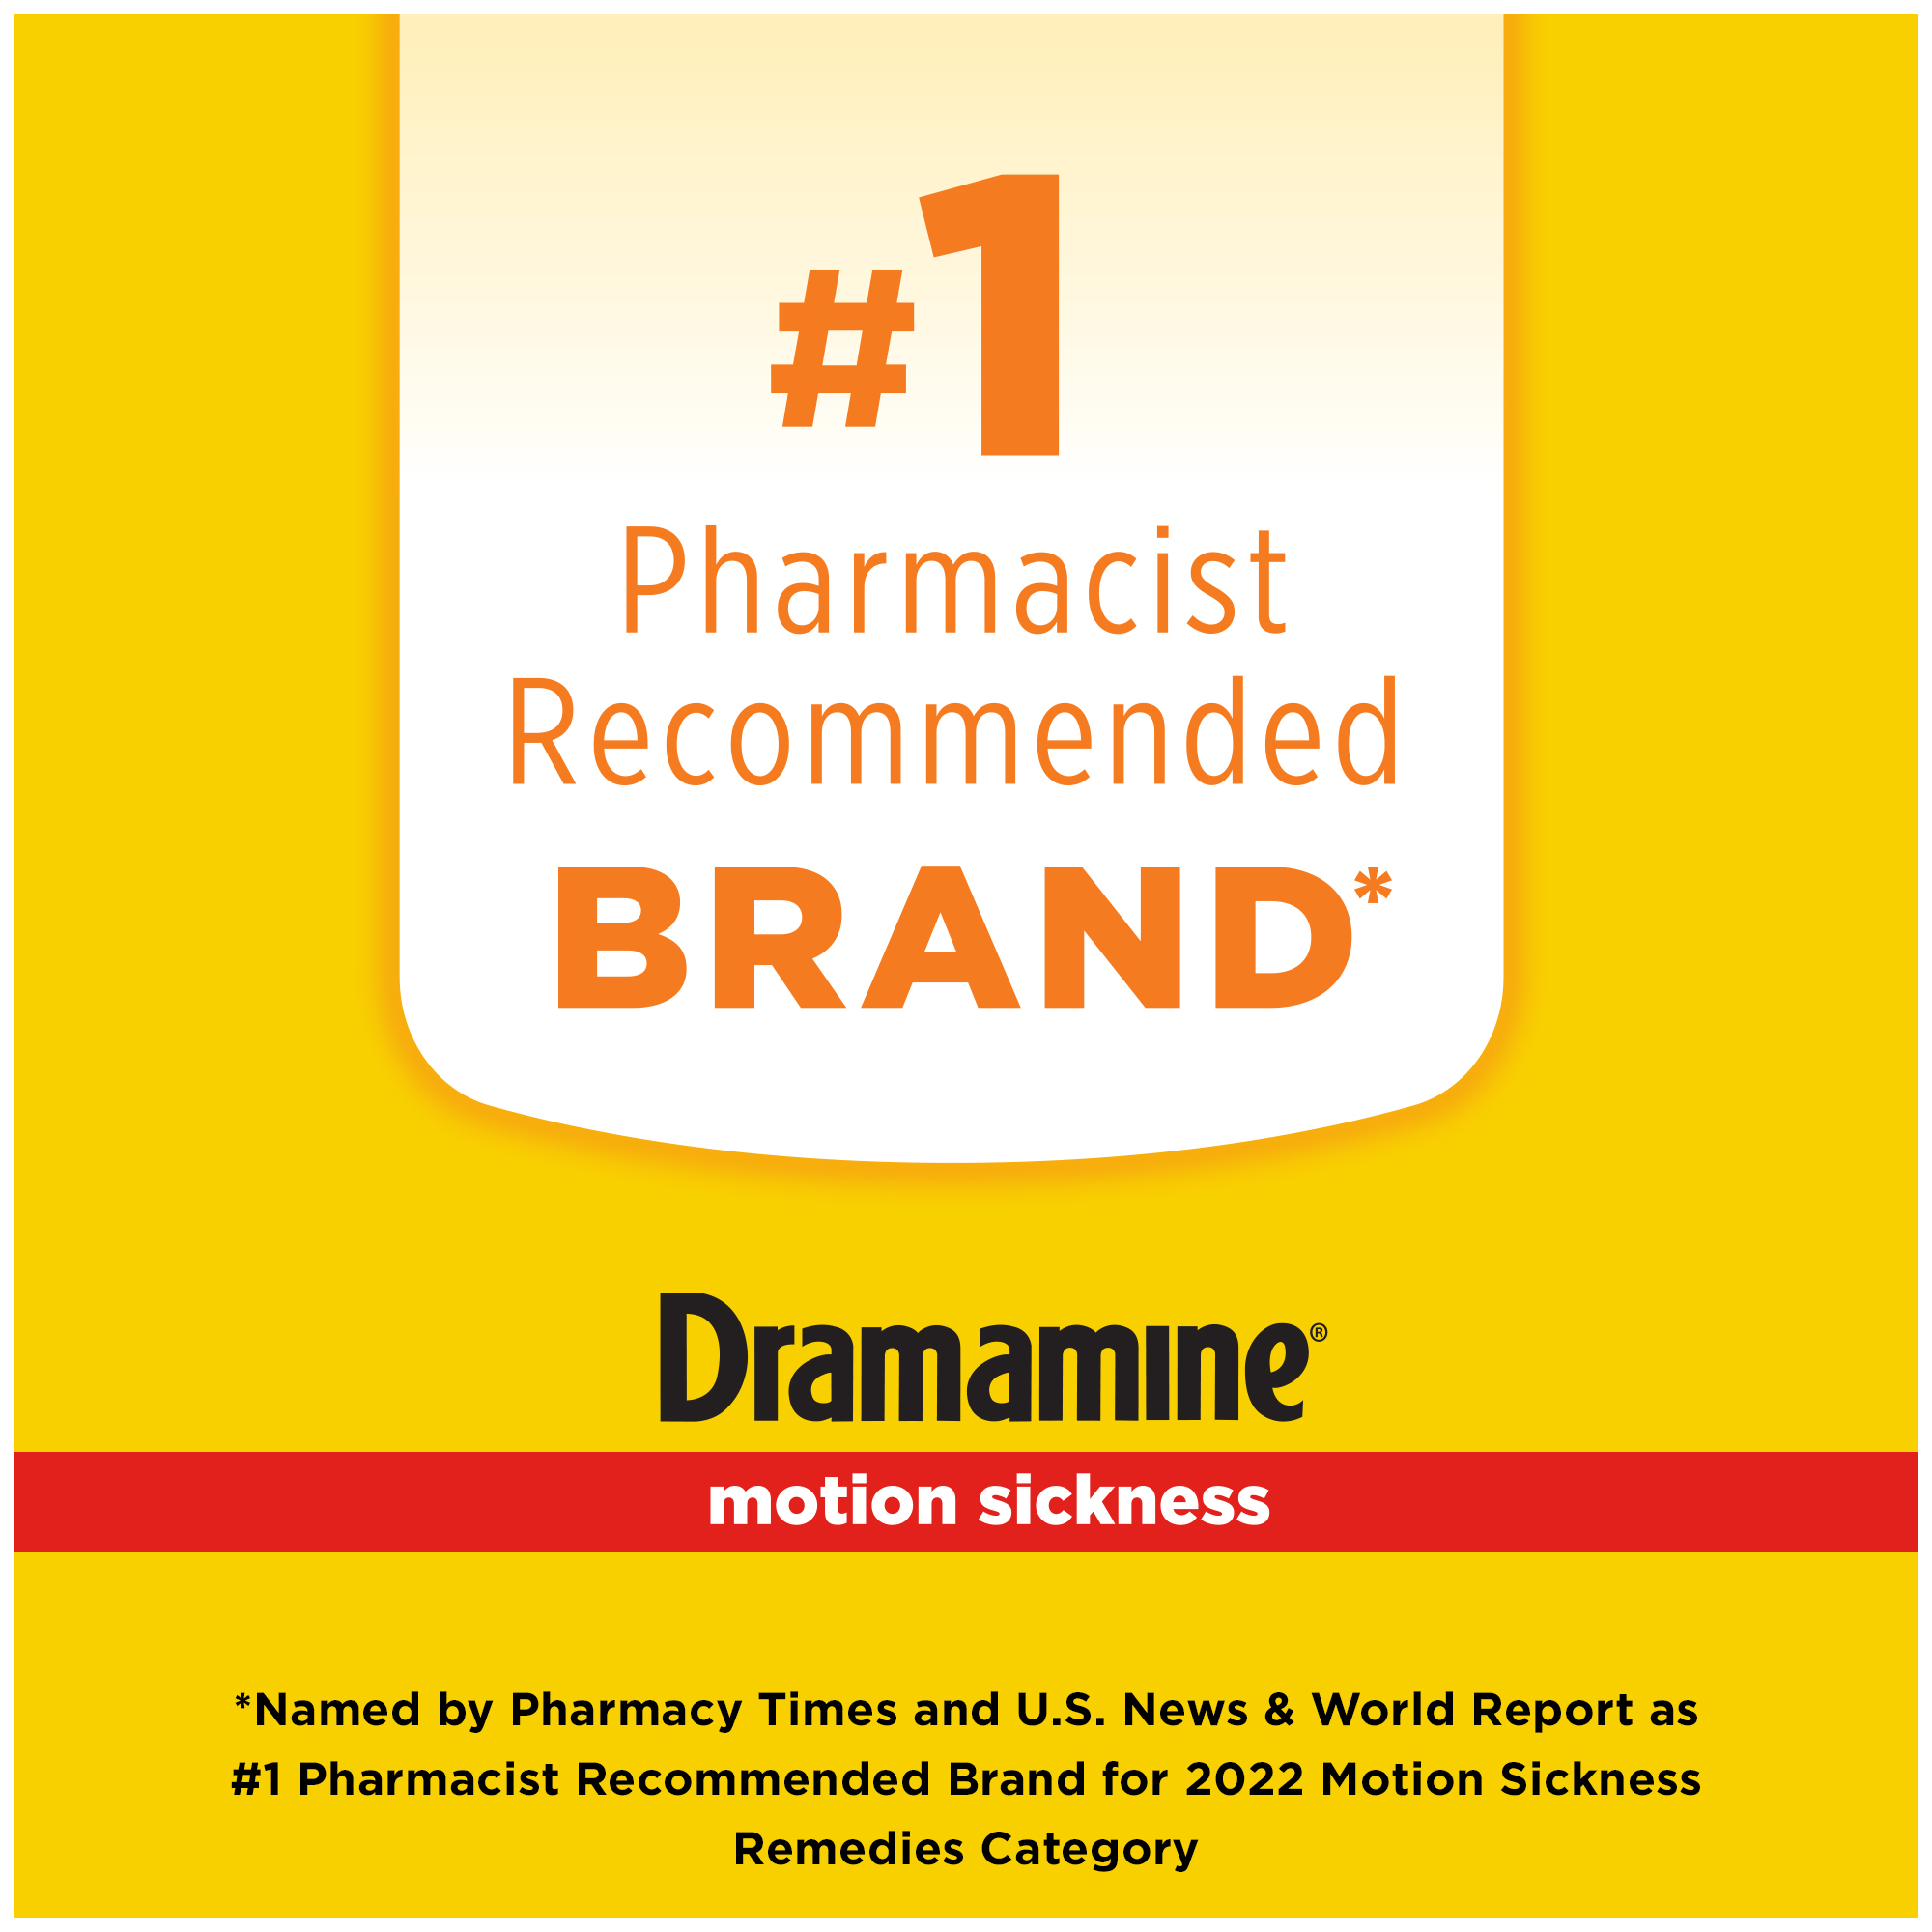 Dramamine All Day Less Drowsy, Motion Sickness Relief, 8 Count - image 4 of 16